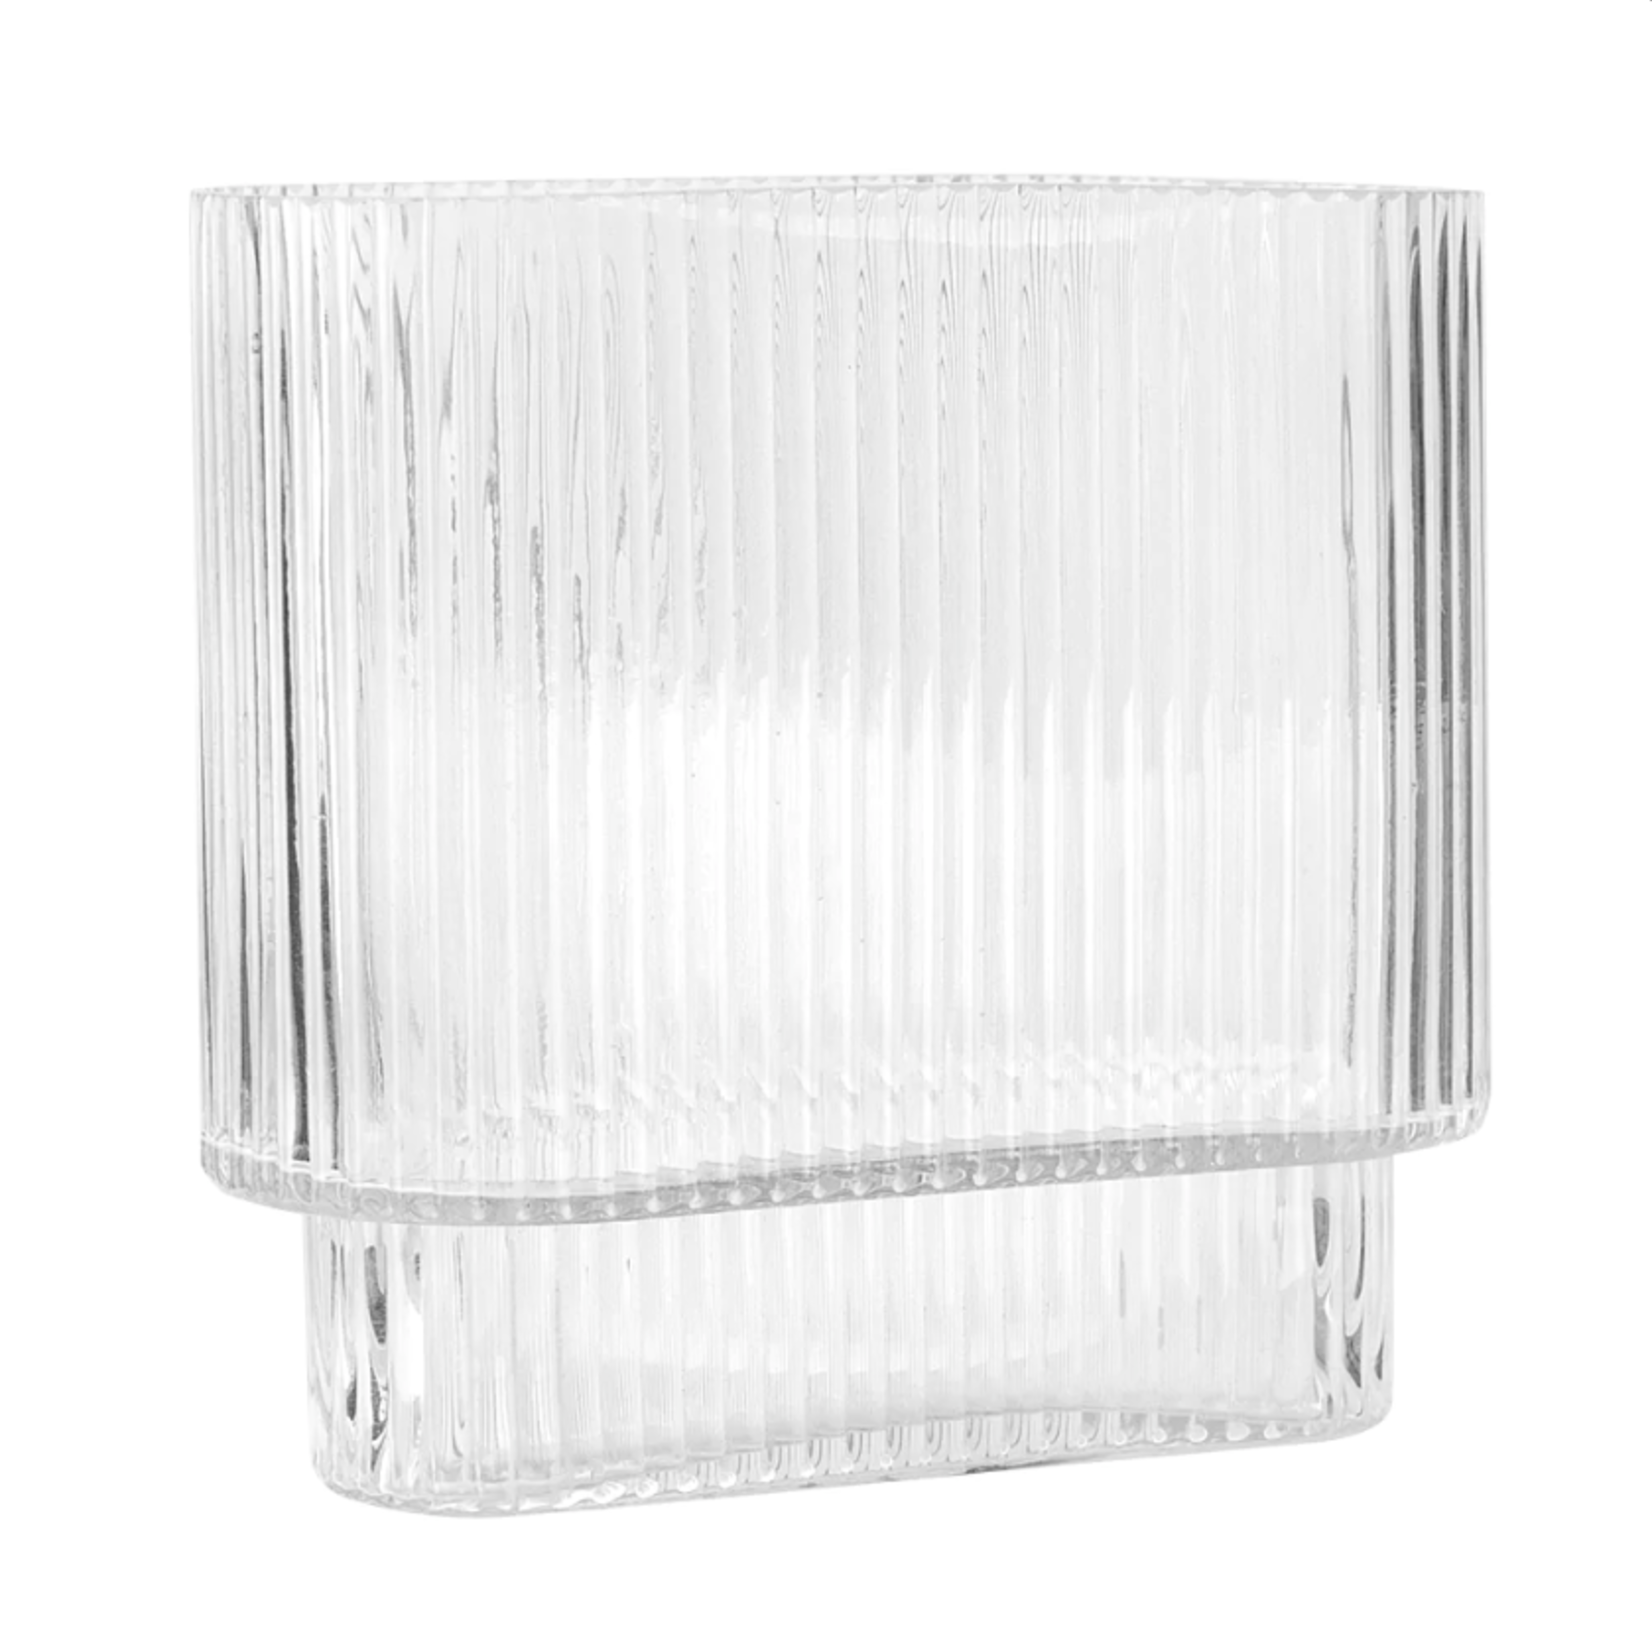 8”H X 8” X 3.75” OVAL GLASS FLUTED VASE